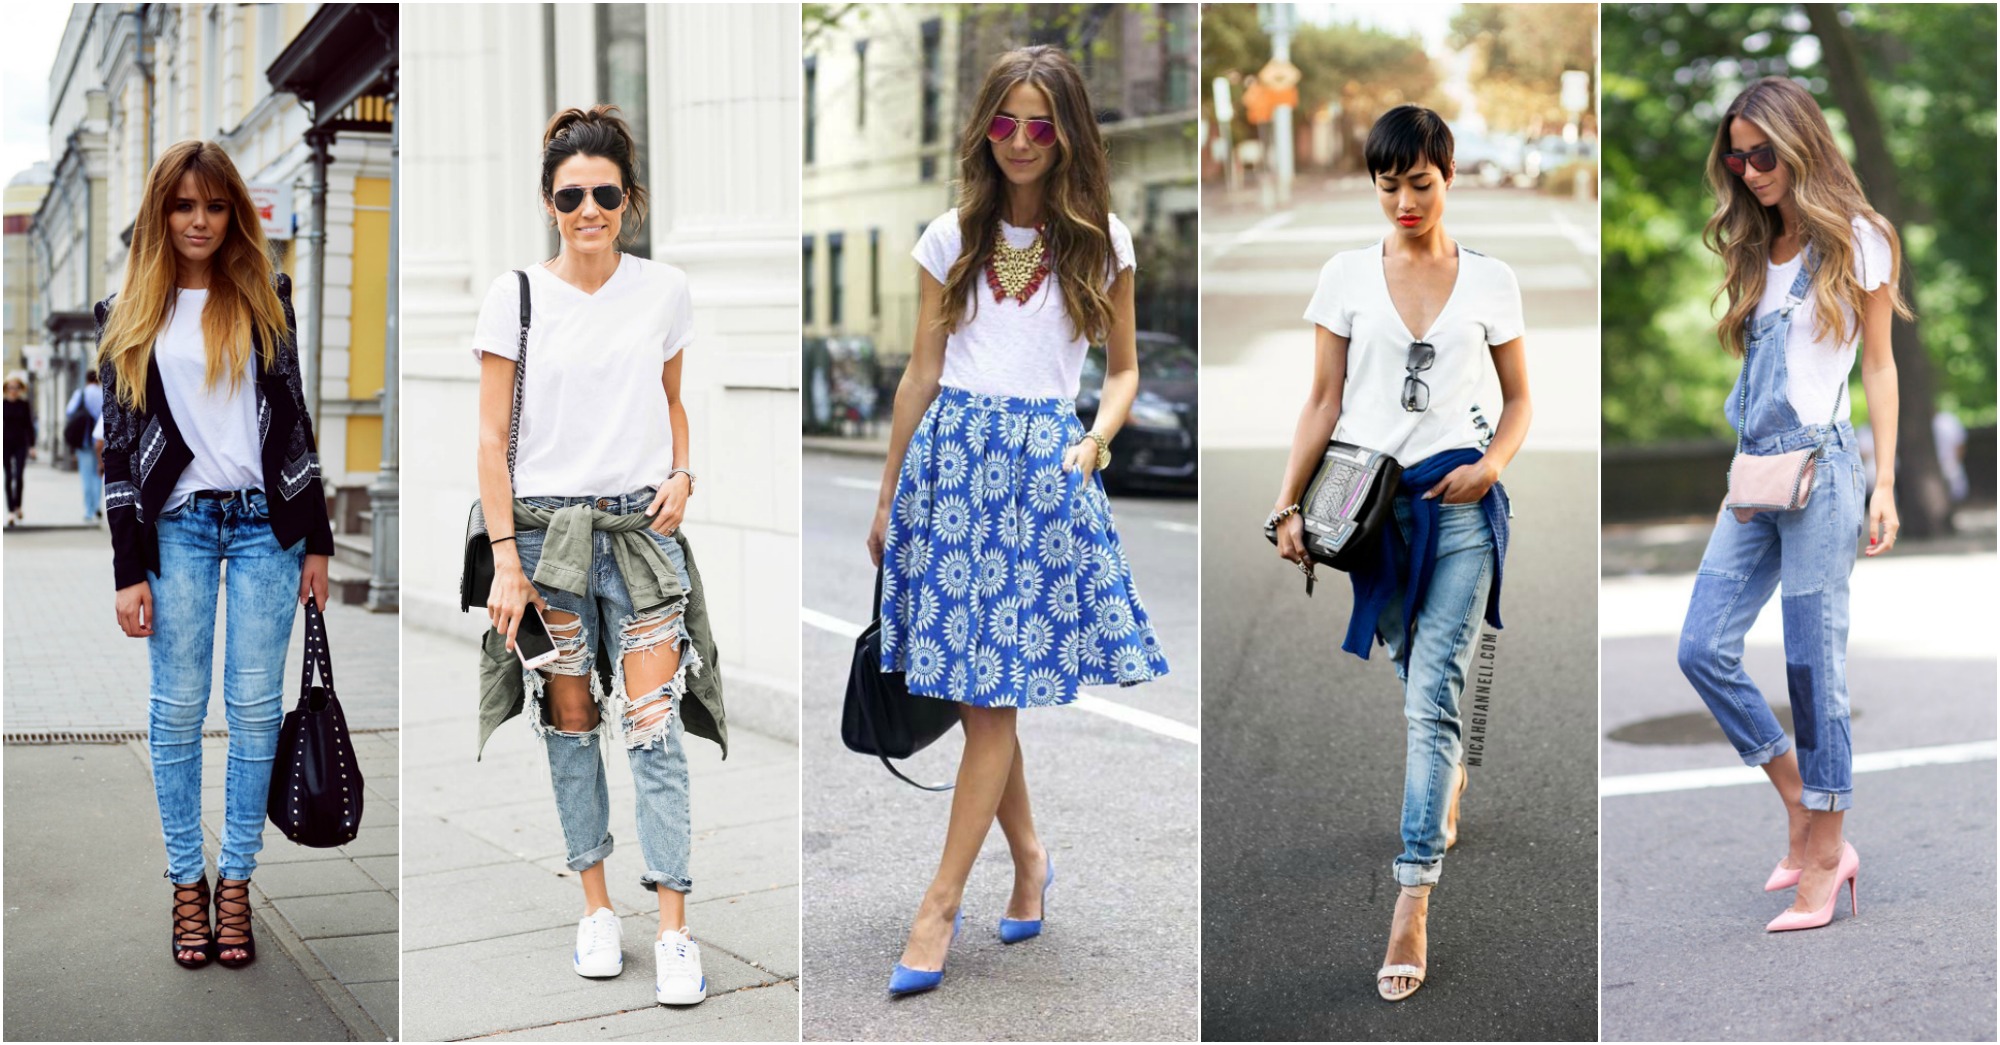 18 Fabulous Ways To Style The Classic White T-Shirt - fashionsy.com